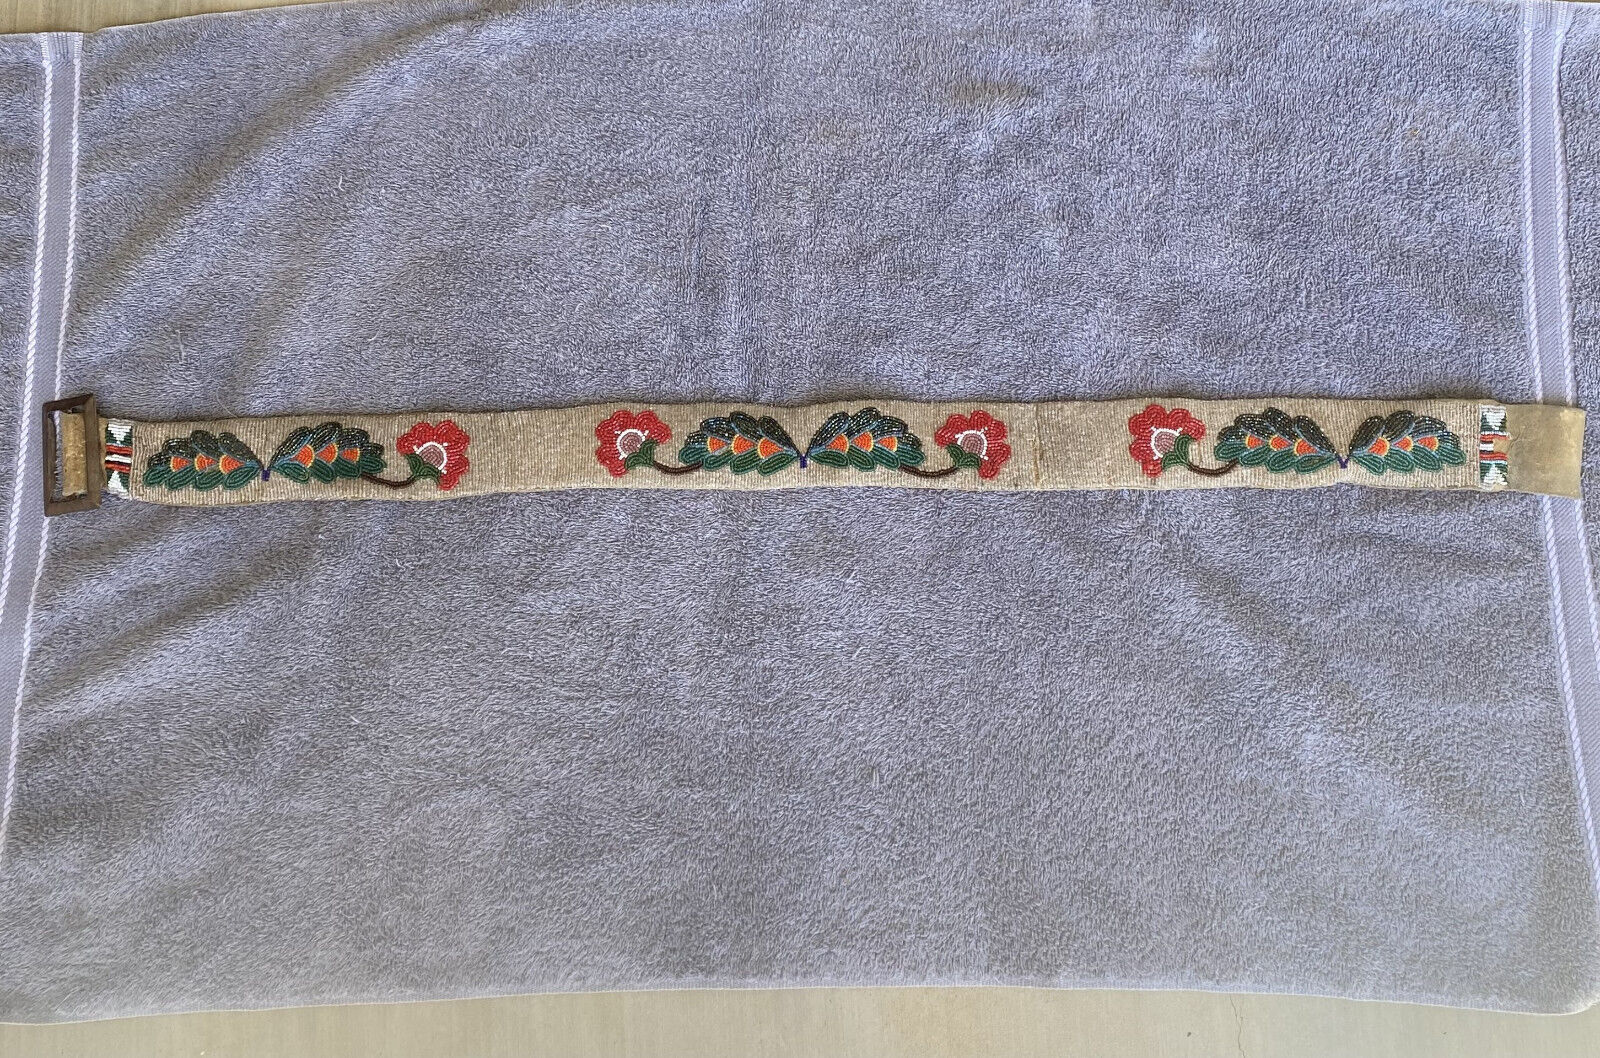 ANTIQUE NATIVE AMERICAN INDIAN BEAD DECORATED BELT WITH FLORAL DESIGN 38